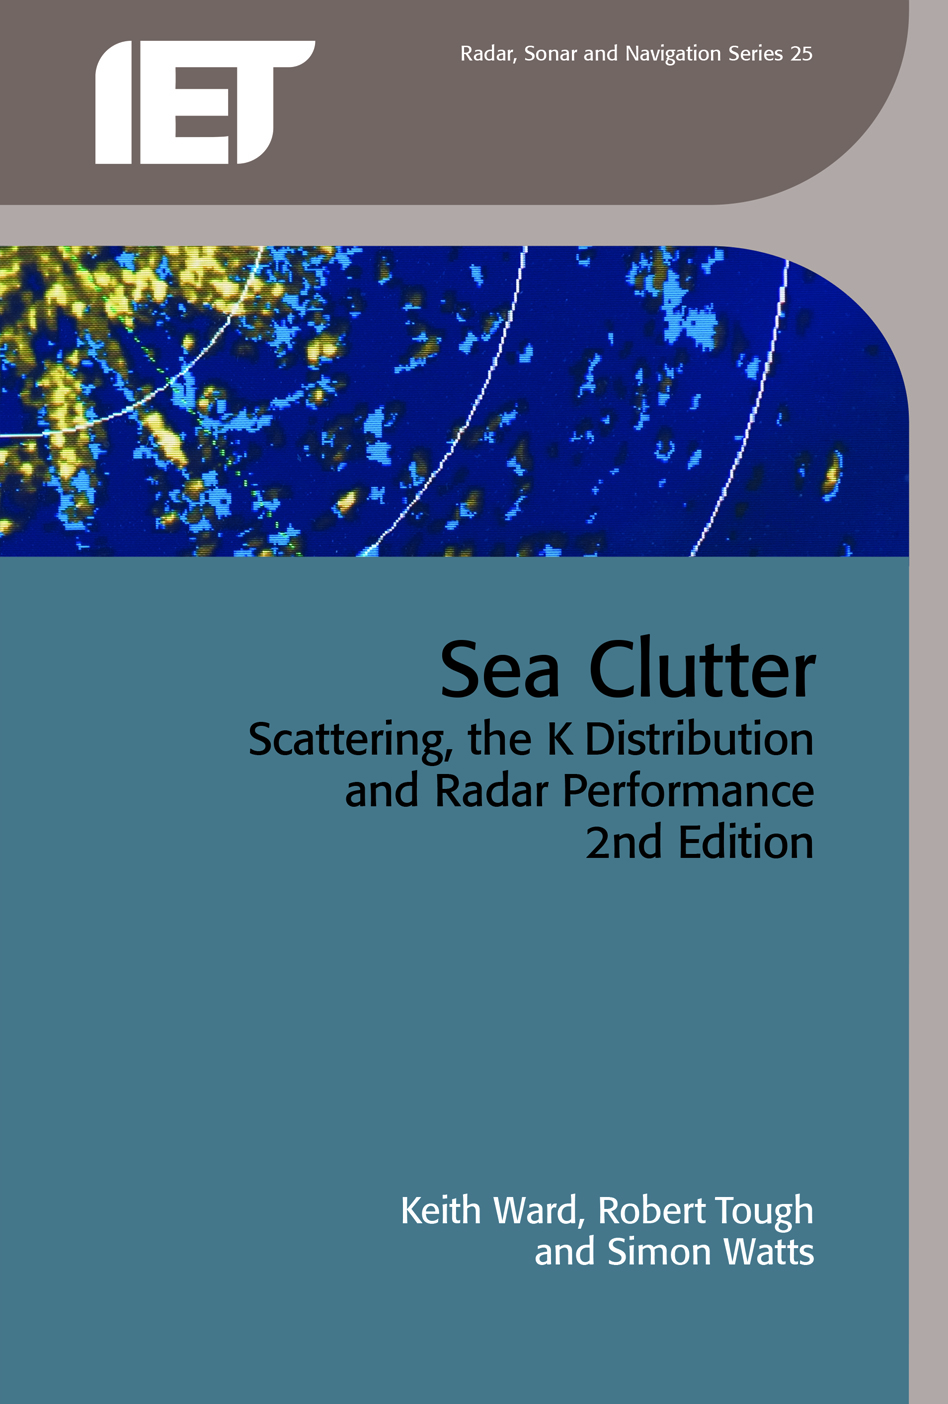 Sea Clutter, Scattering, the K distribution and radar performance, 2nd Edition